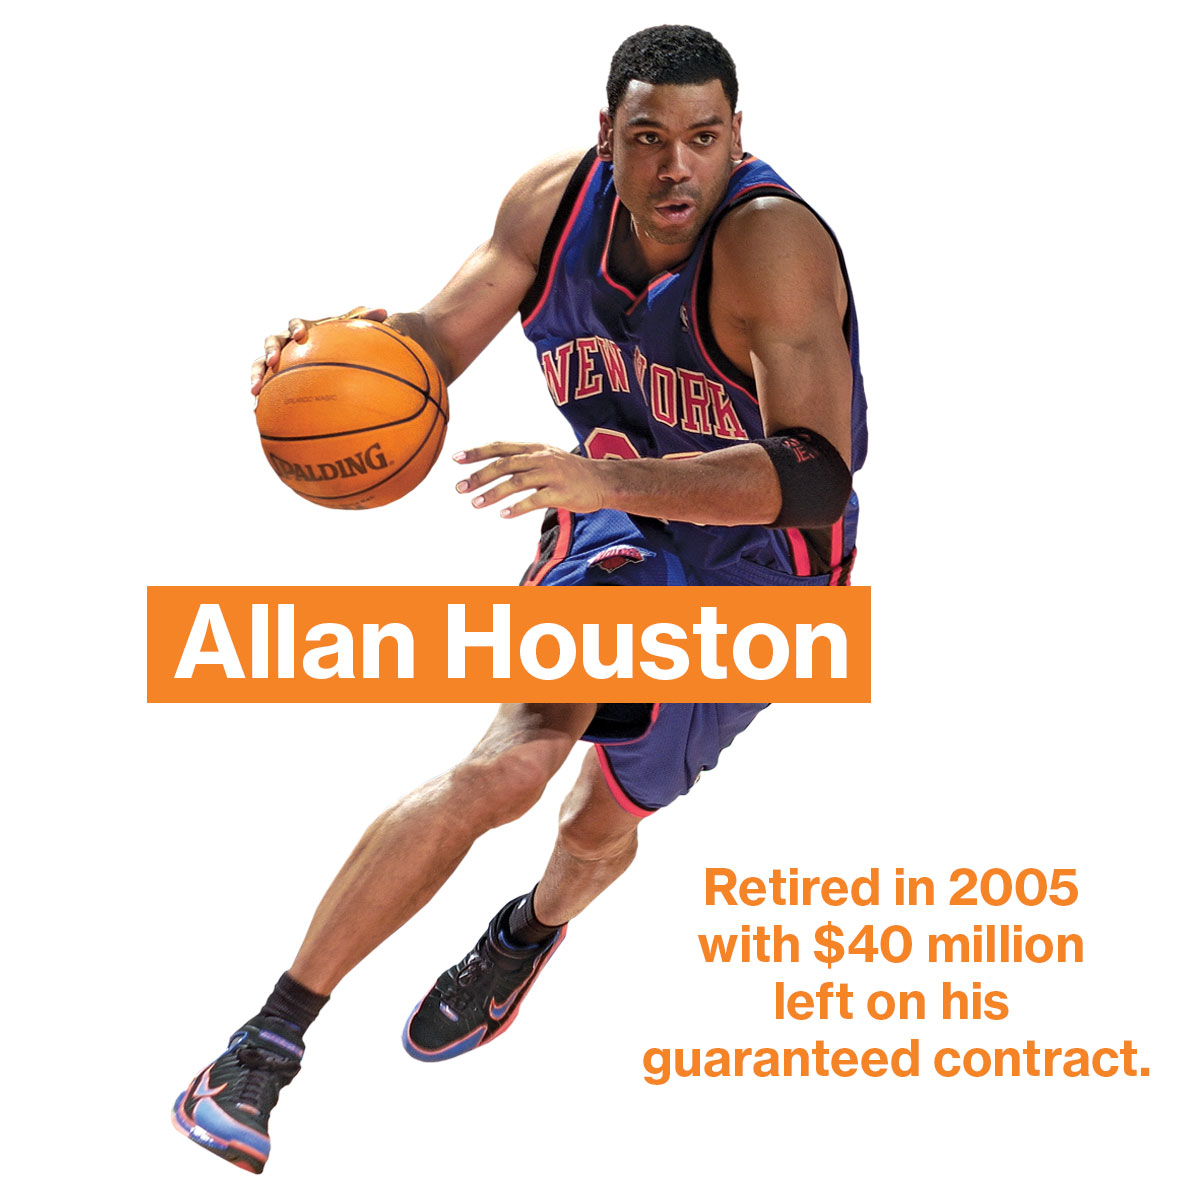 Does Allan Houston deserve to get his number retired by the Knicks